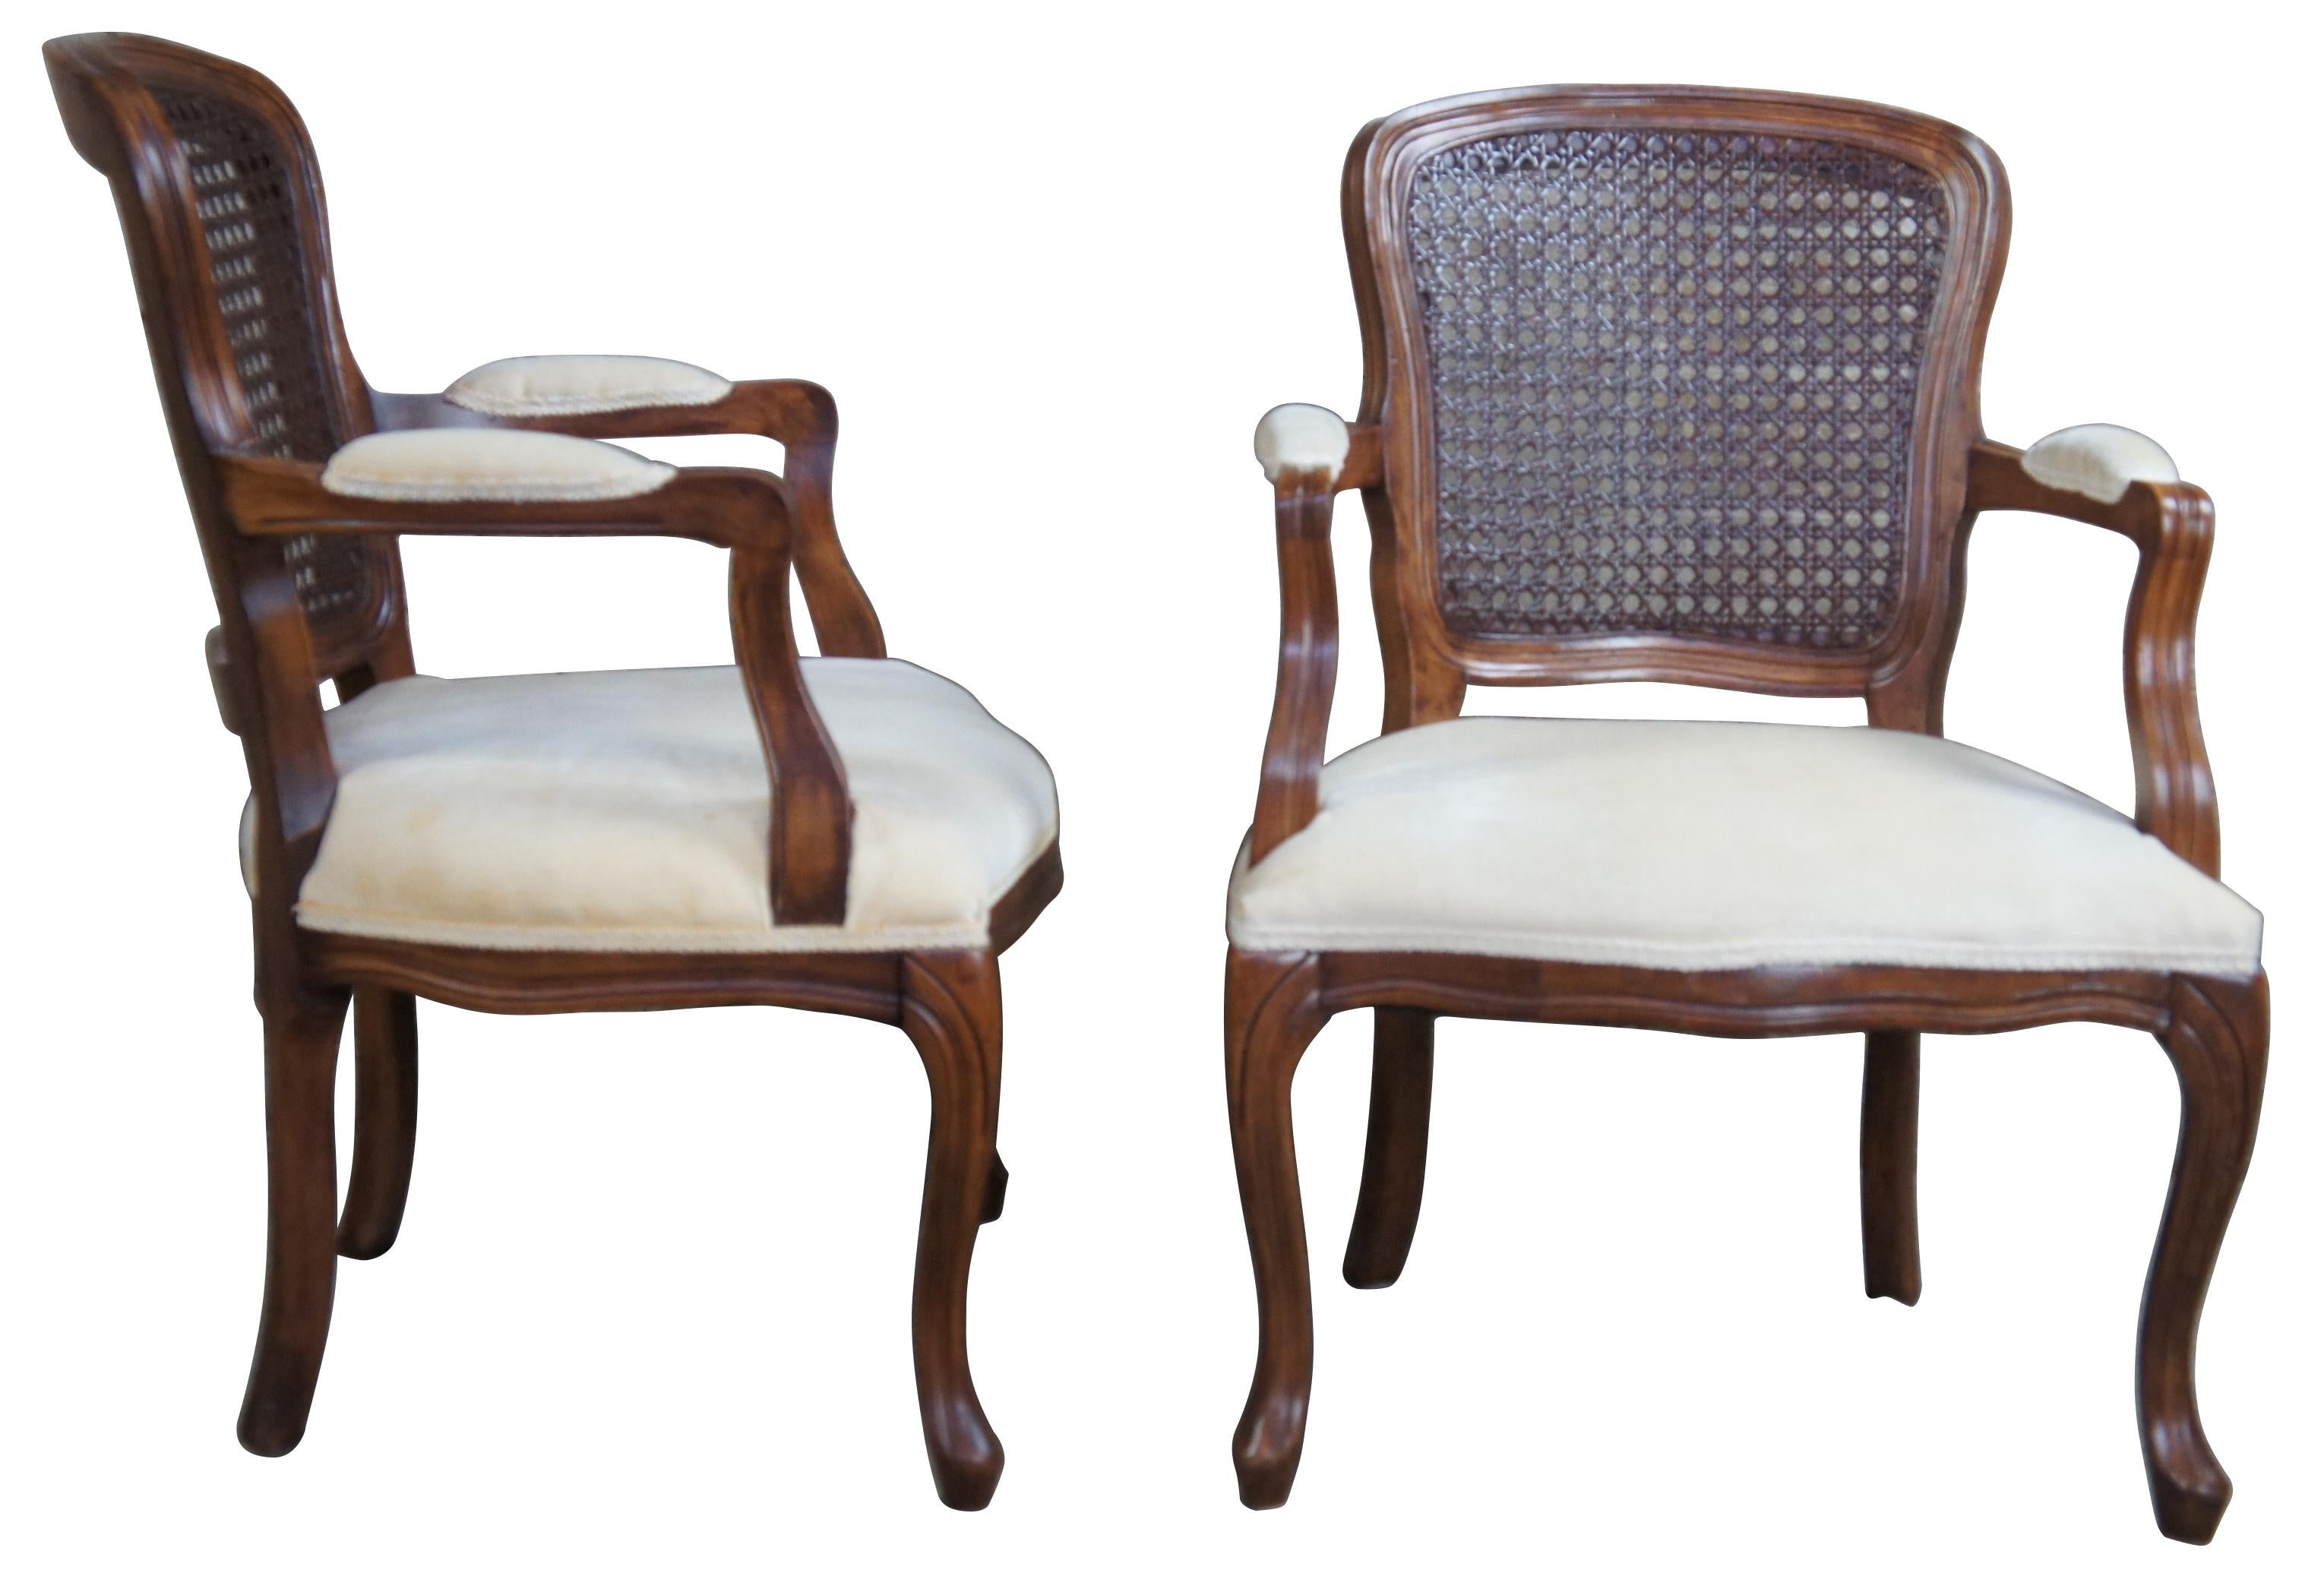 Antique distressed walnut cane back chairs. Features open arms and cabriole legs. 
  